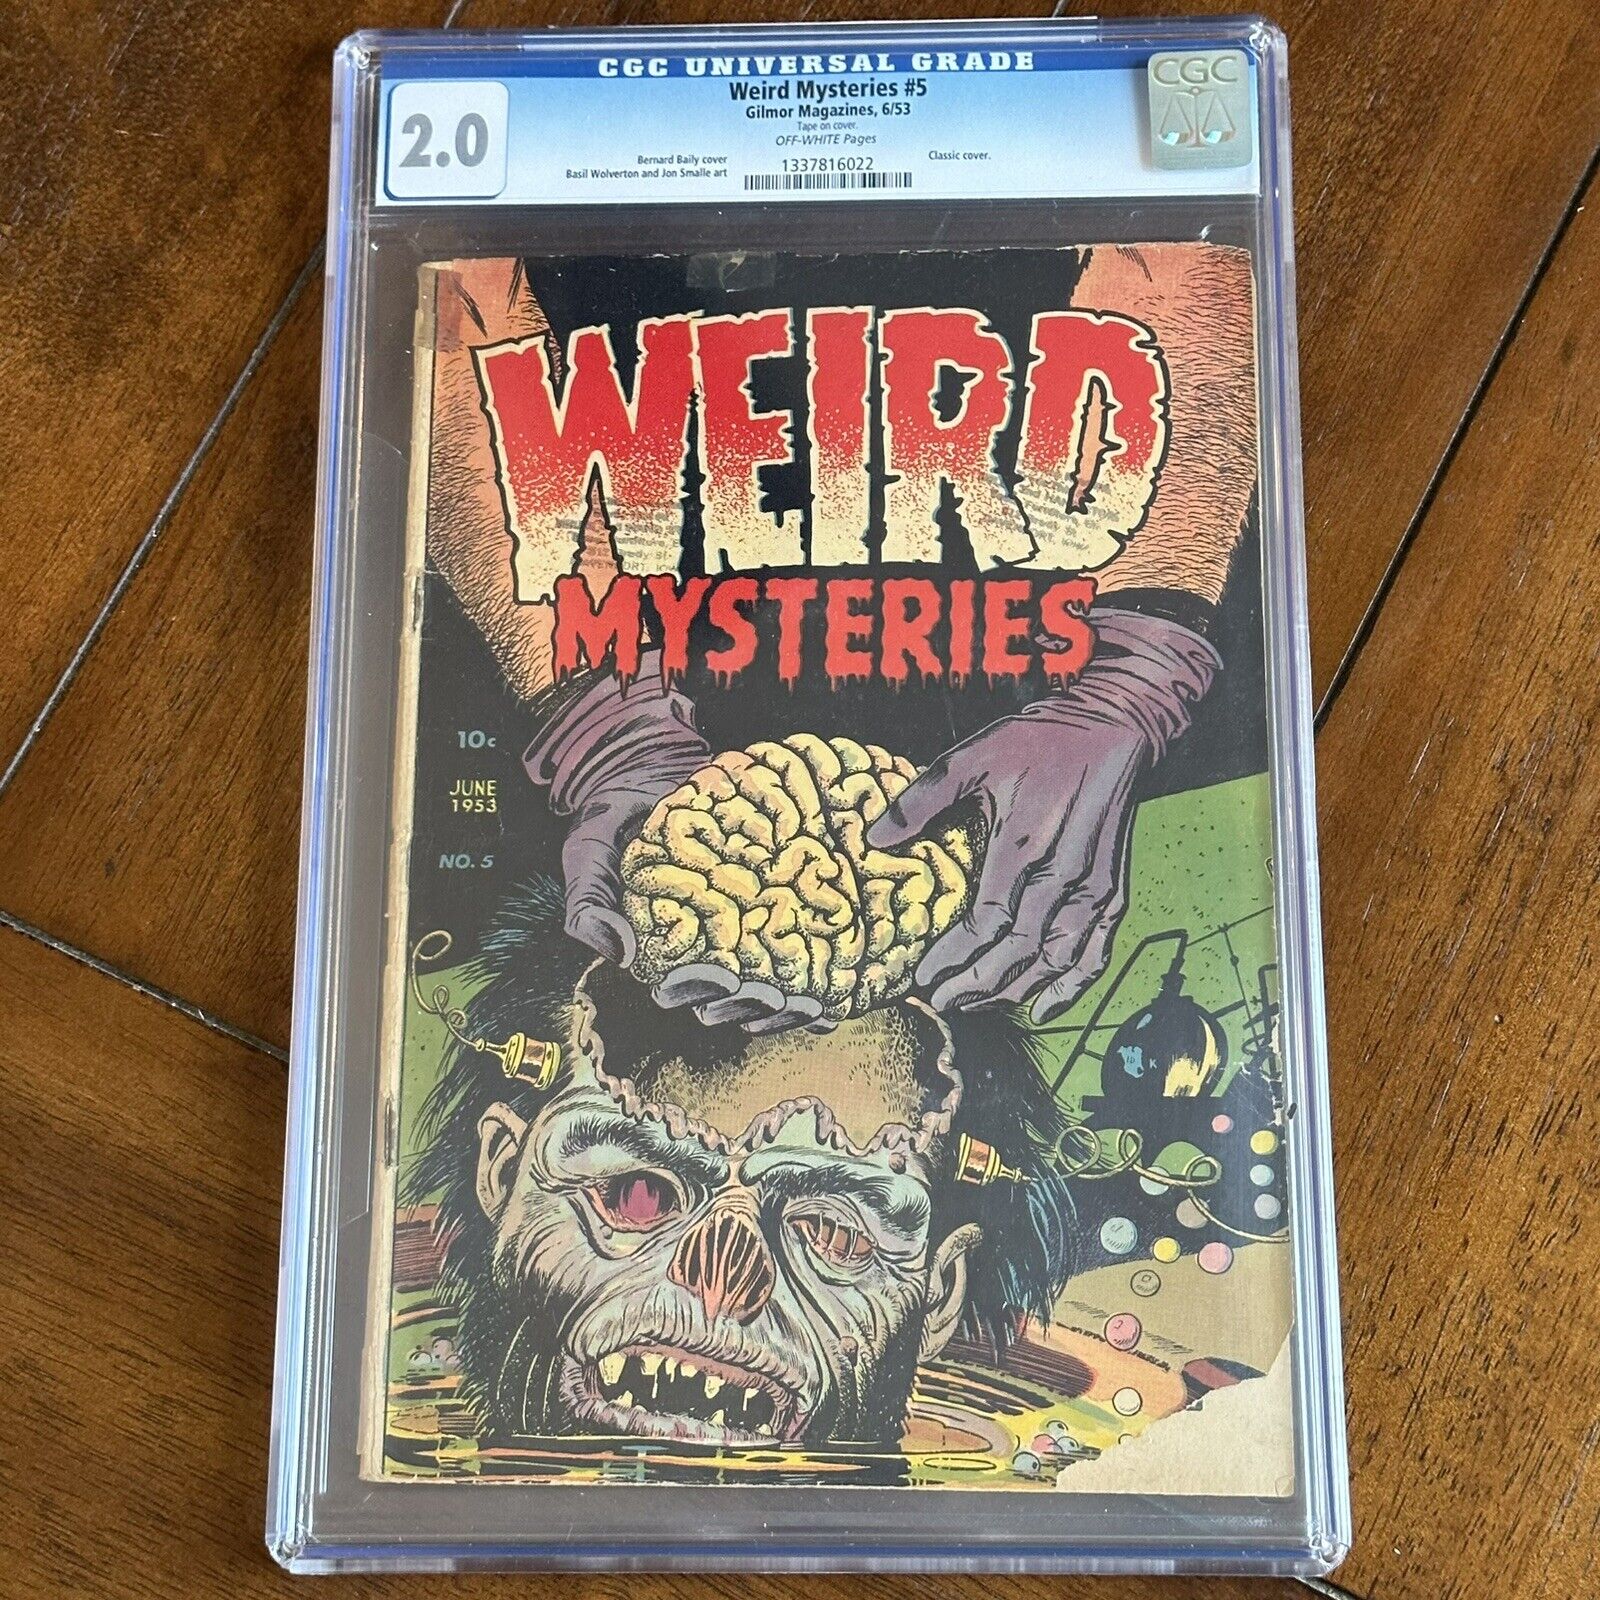 Weird Mysteries #5 (1953) - Golden Age Horror PCH Classic Cover - CGC 2.0